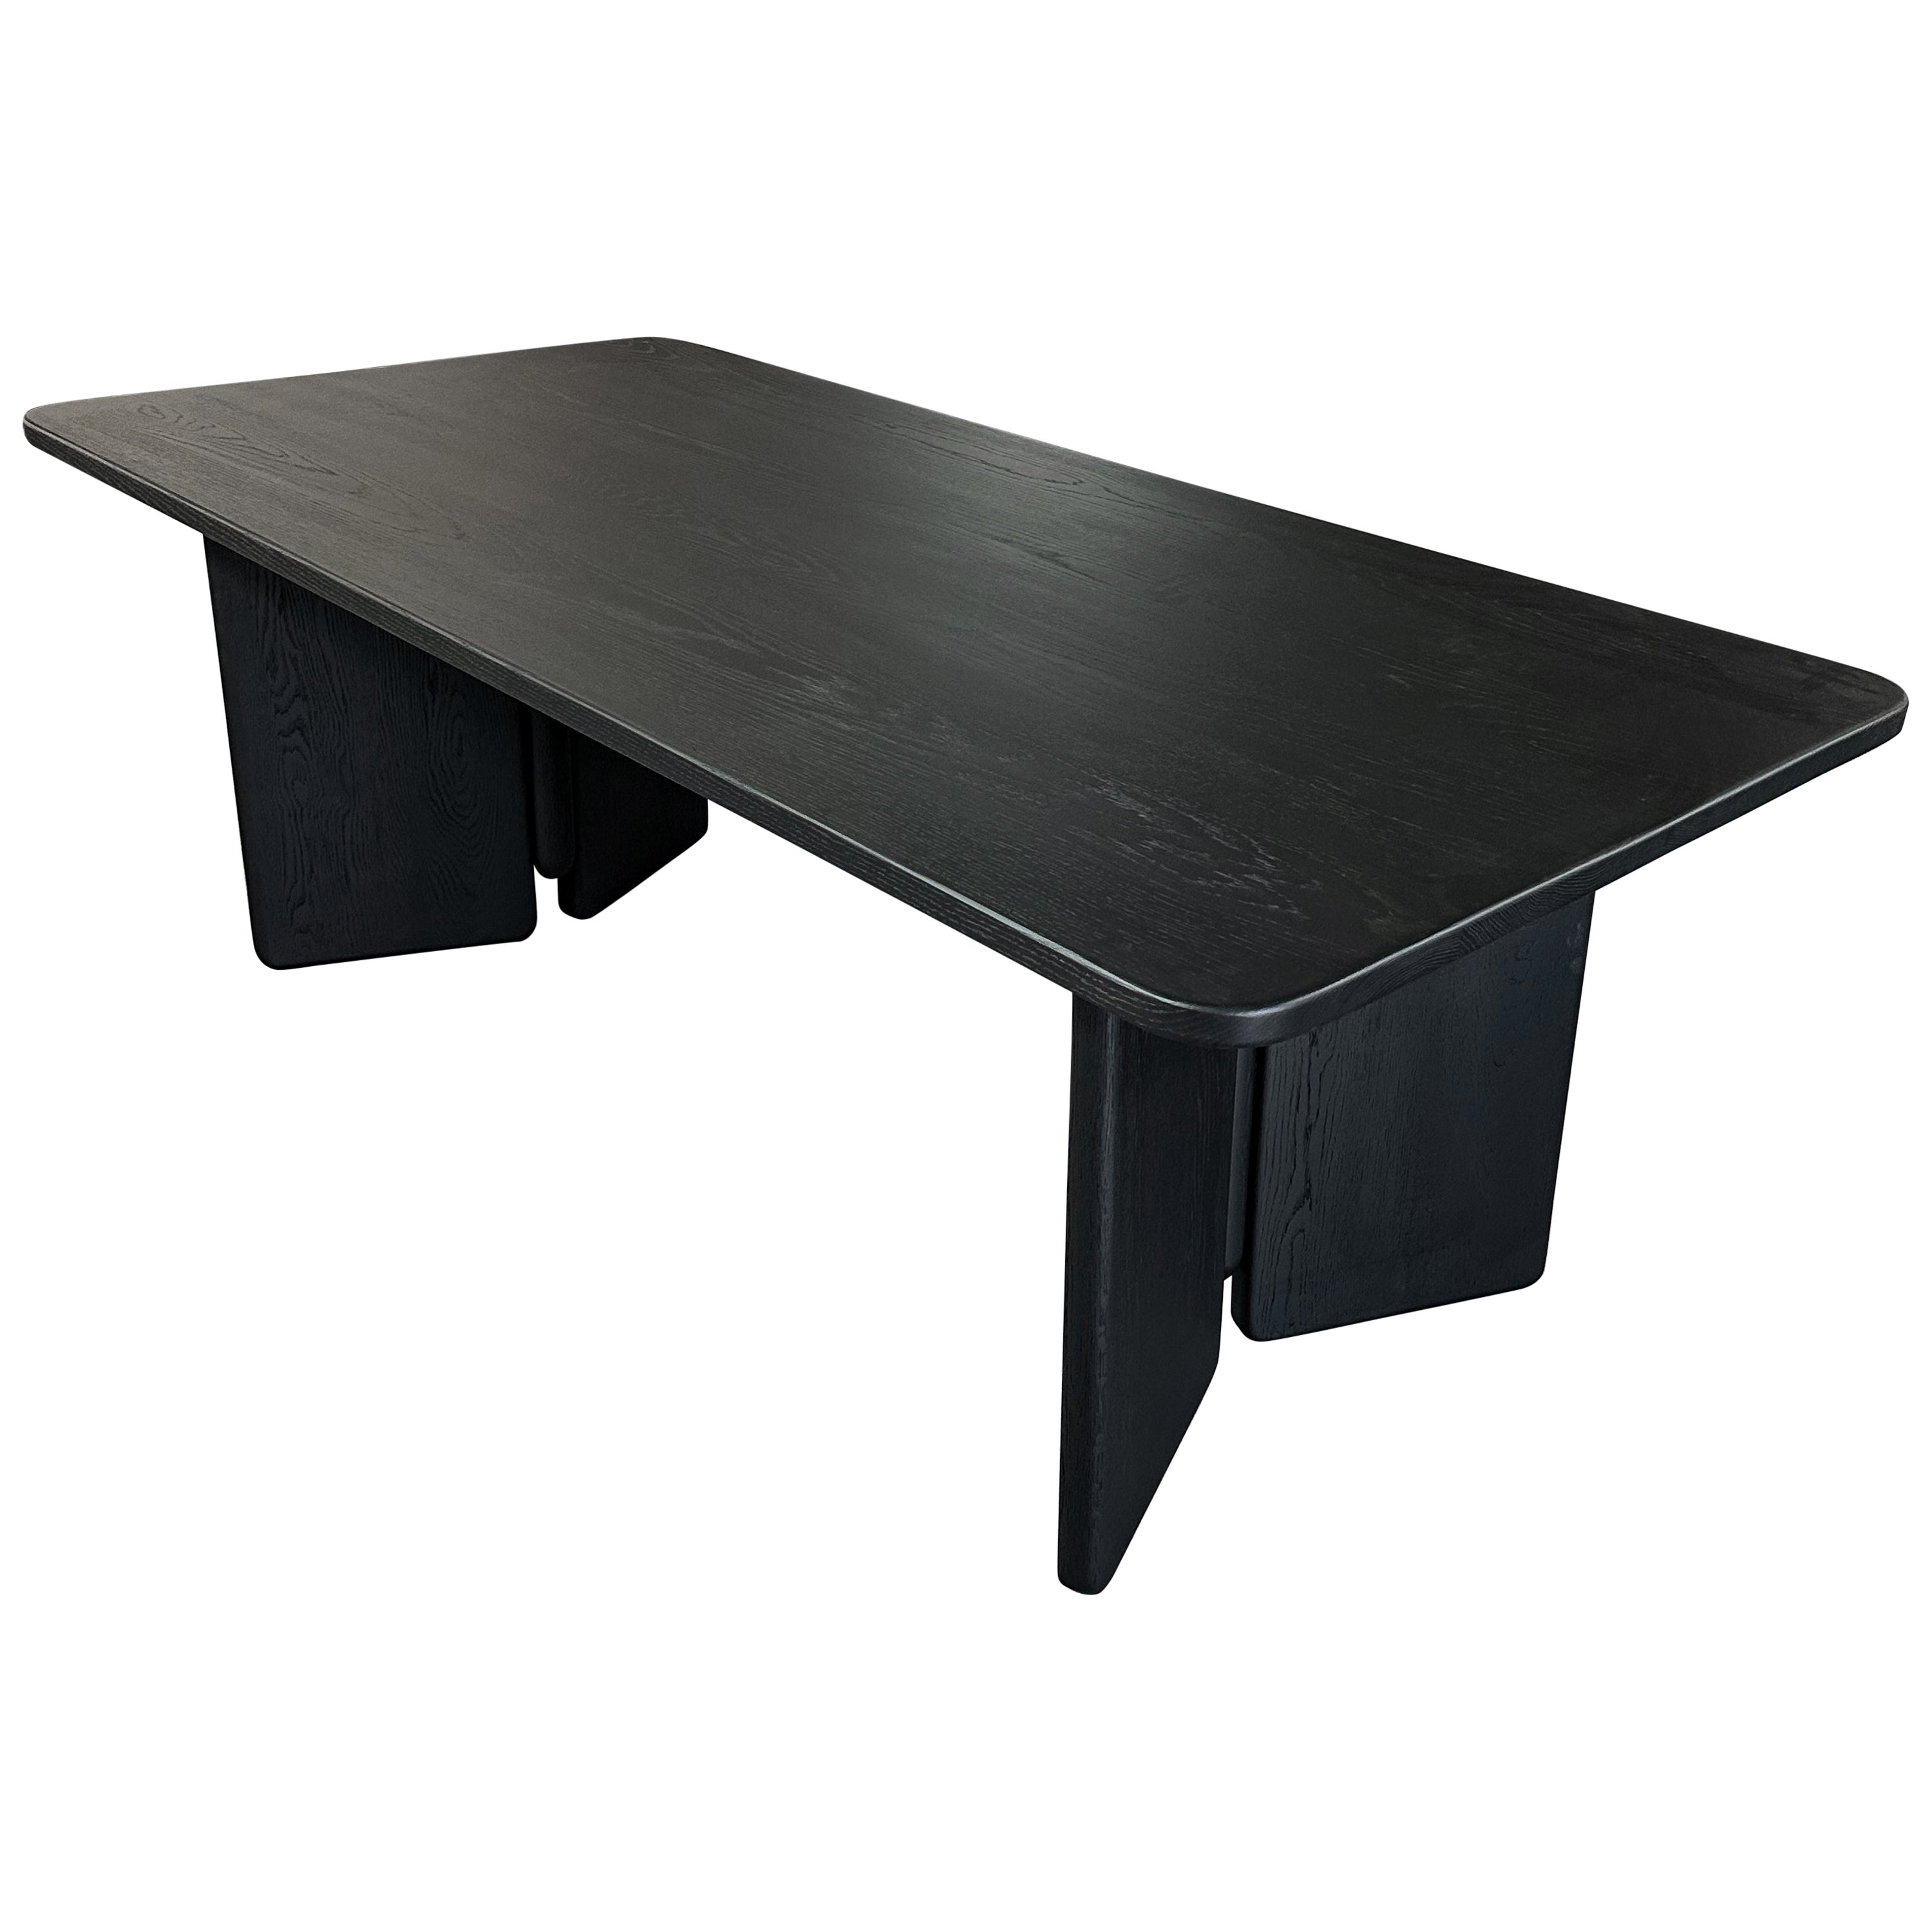 Custom Midcentury Style Rectangular Black Oak Dining Table by Adesso Imports For Sale